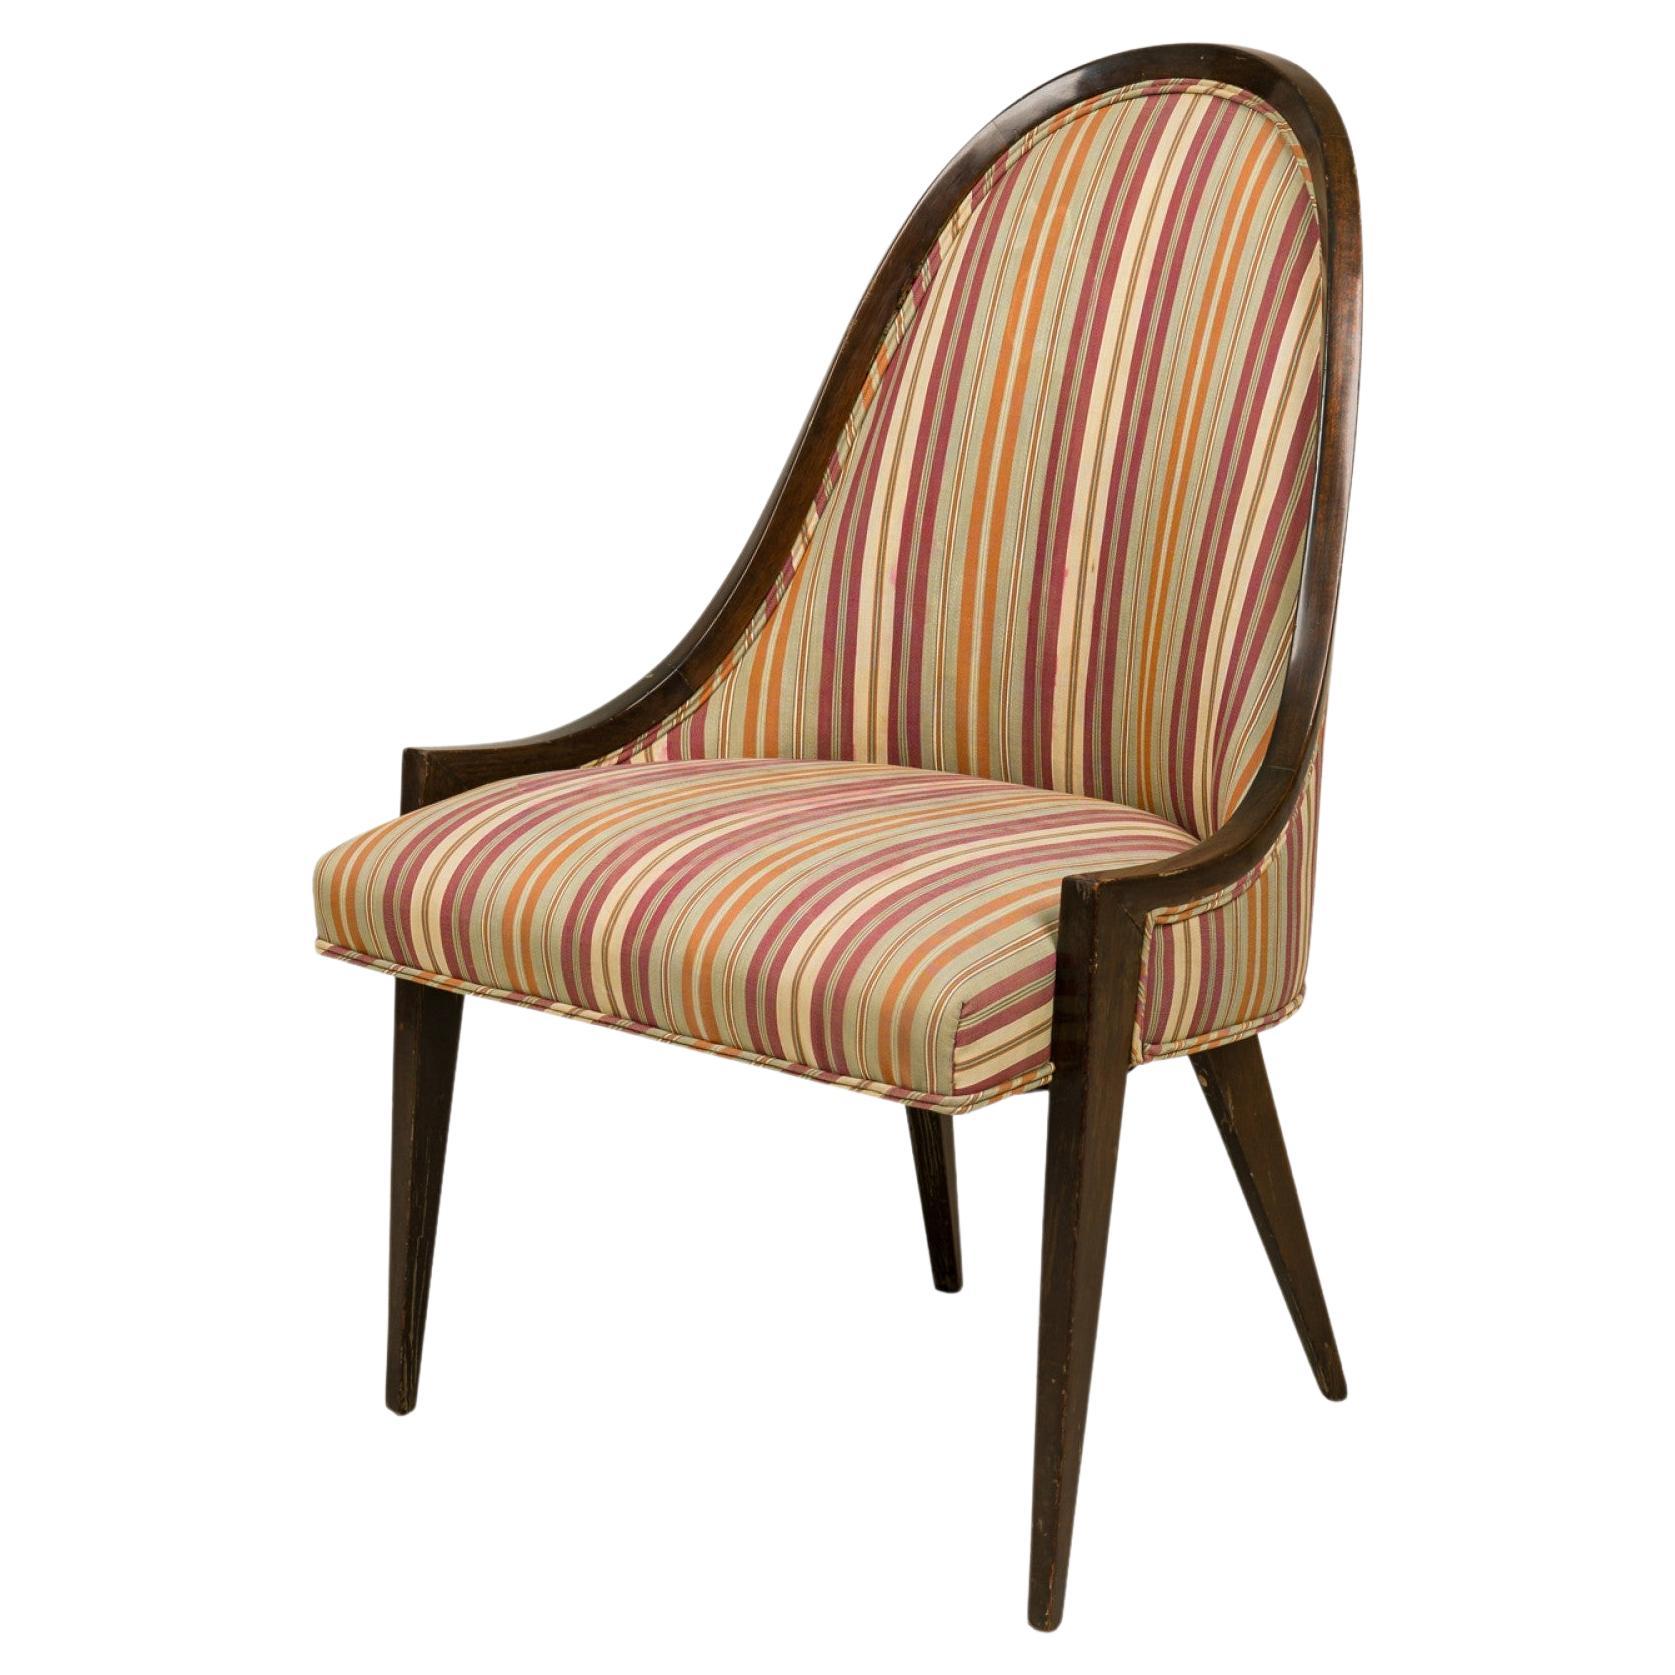 Harvey Probber 'Gondola' Wood and Striped Upholstery Side Chair For Sale